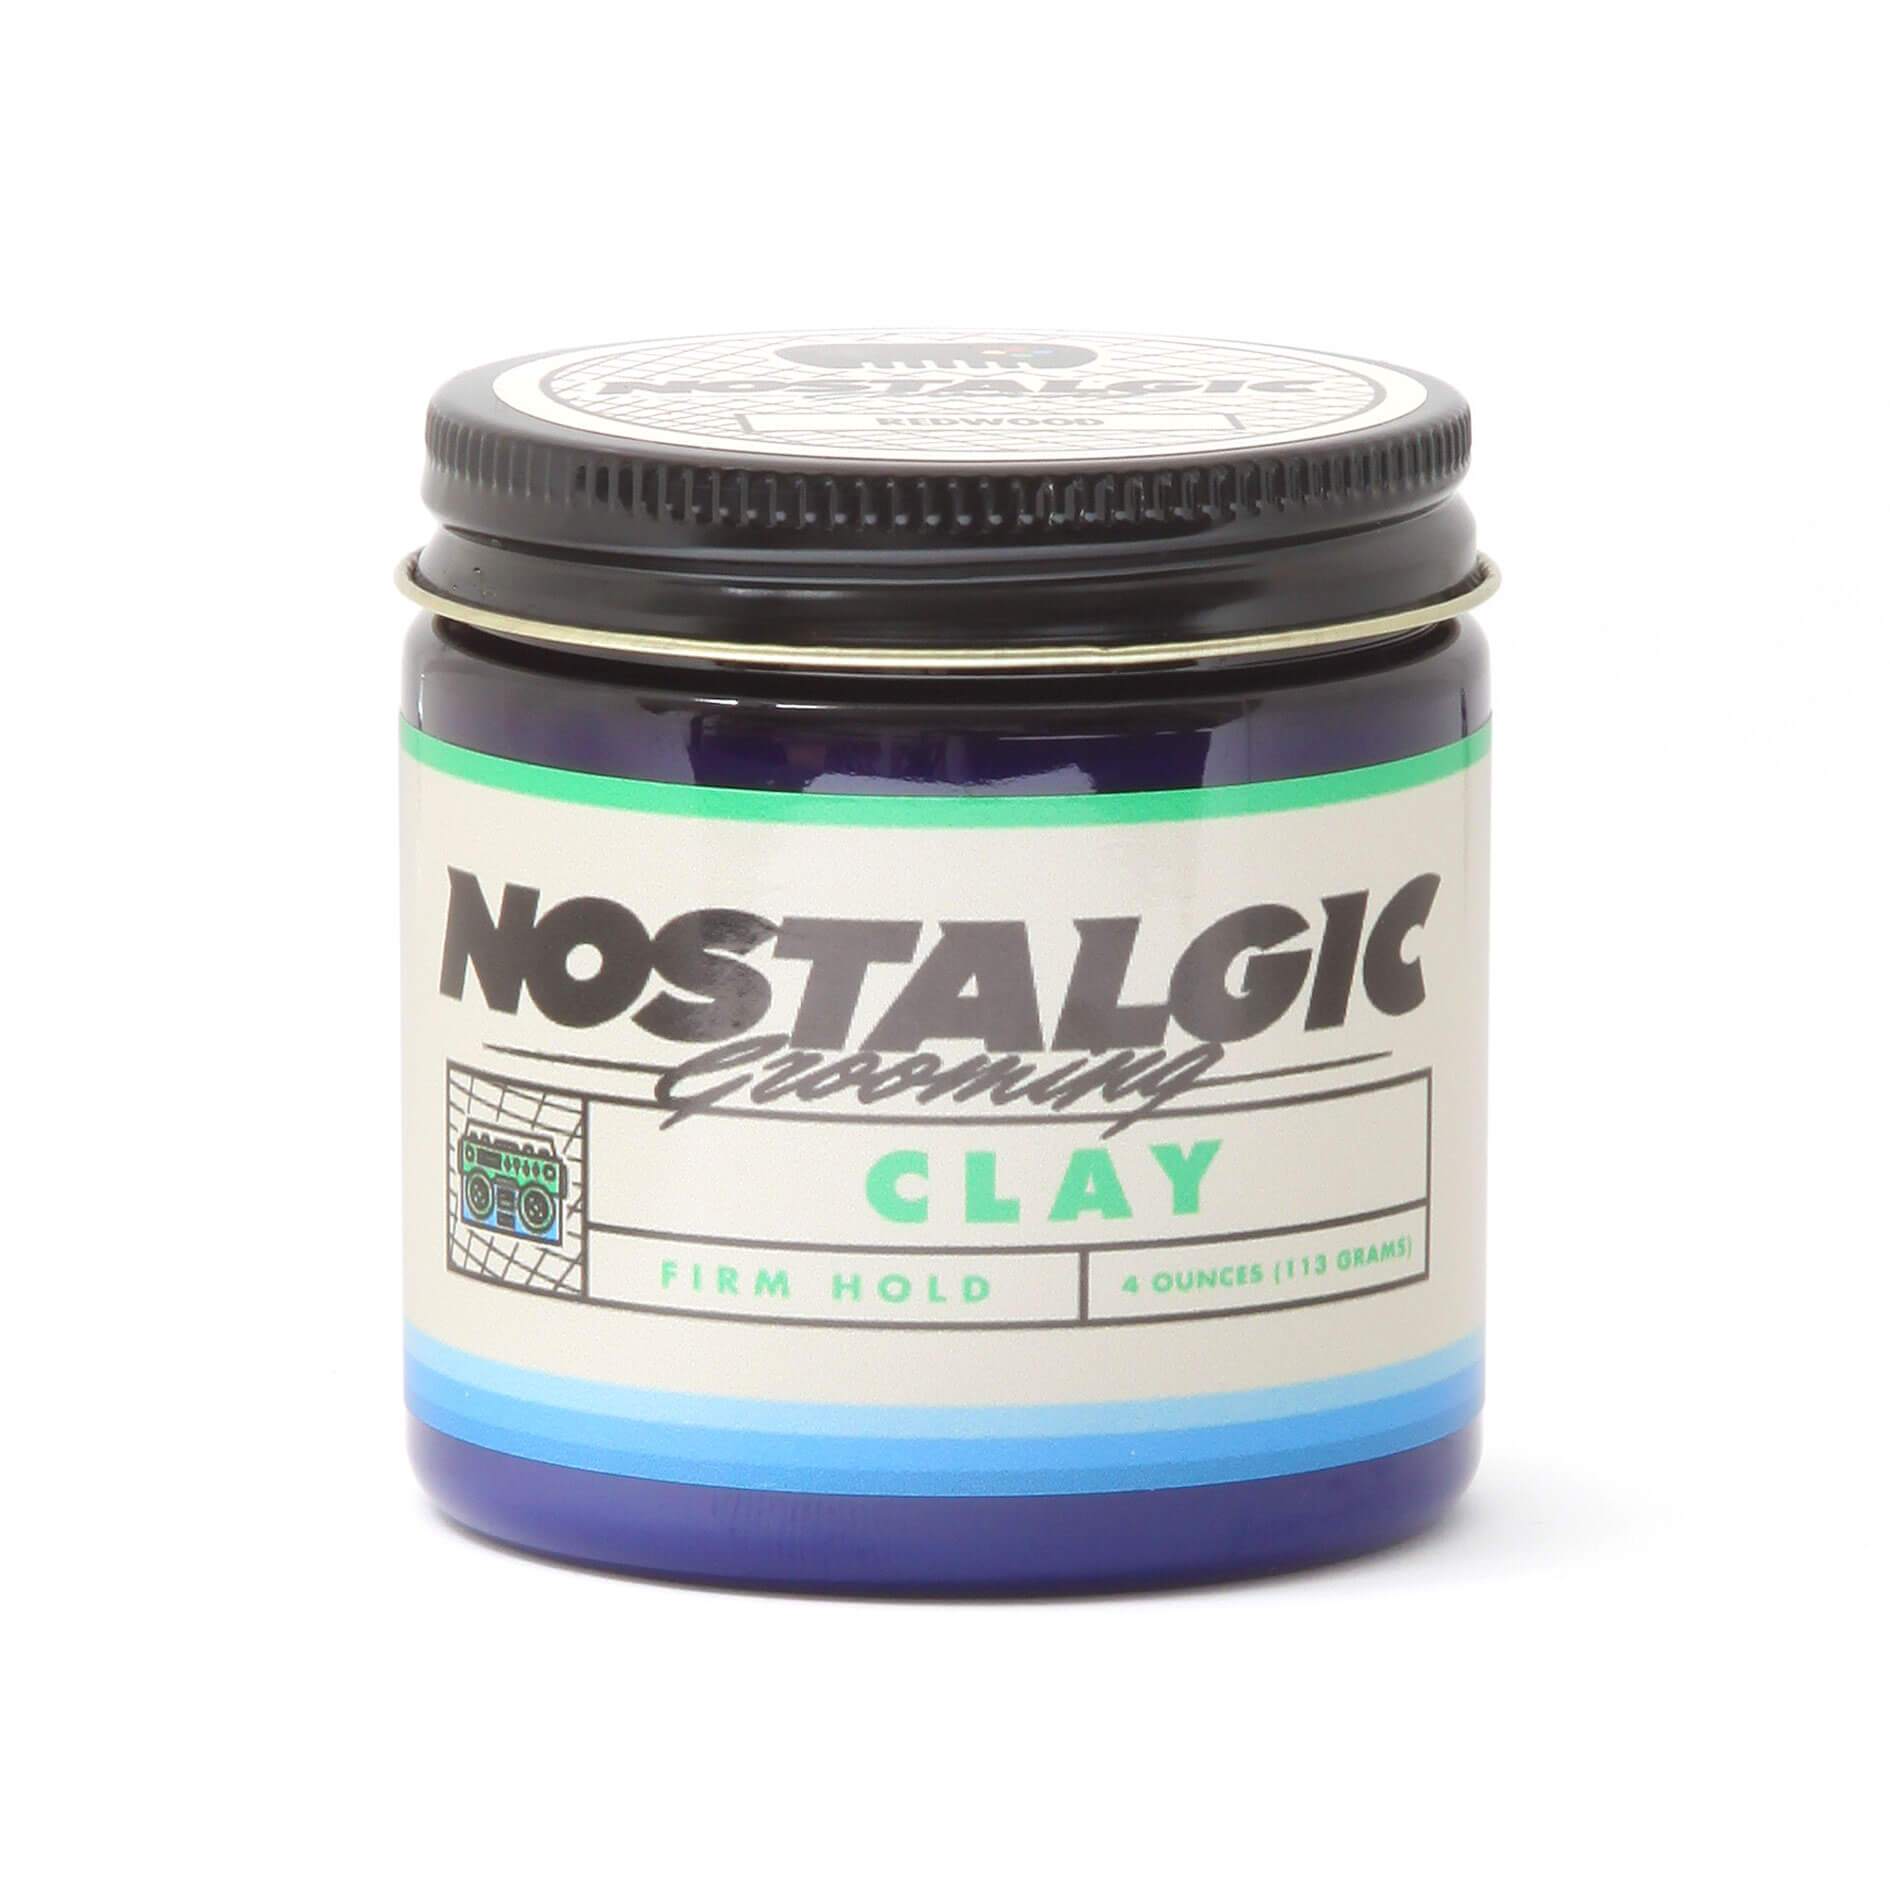 Nostalgic Grooming Water Based Clay